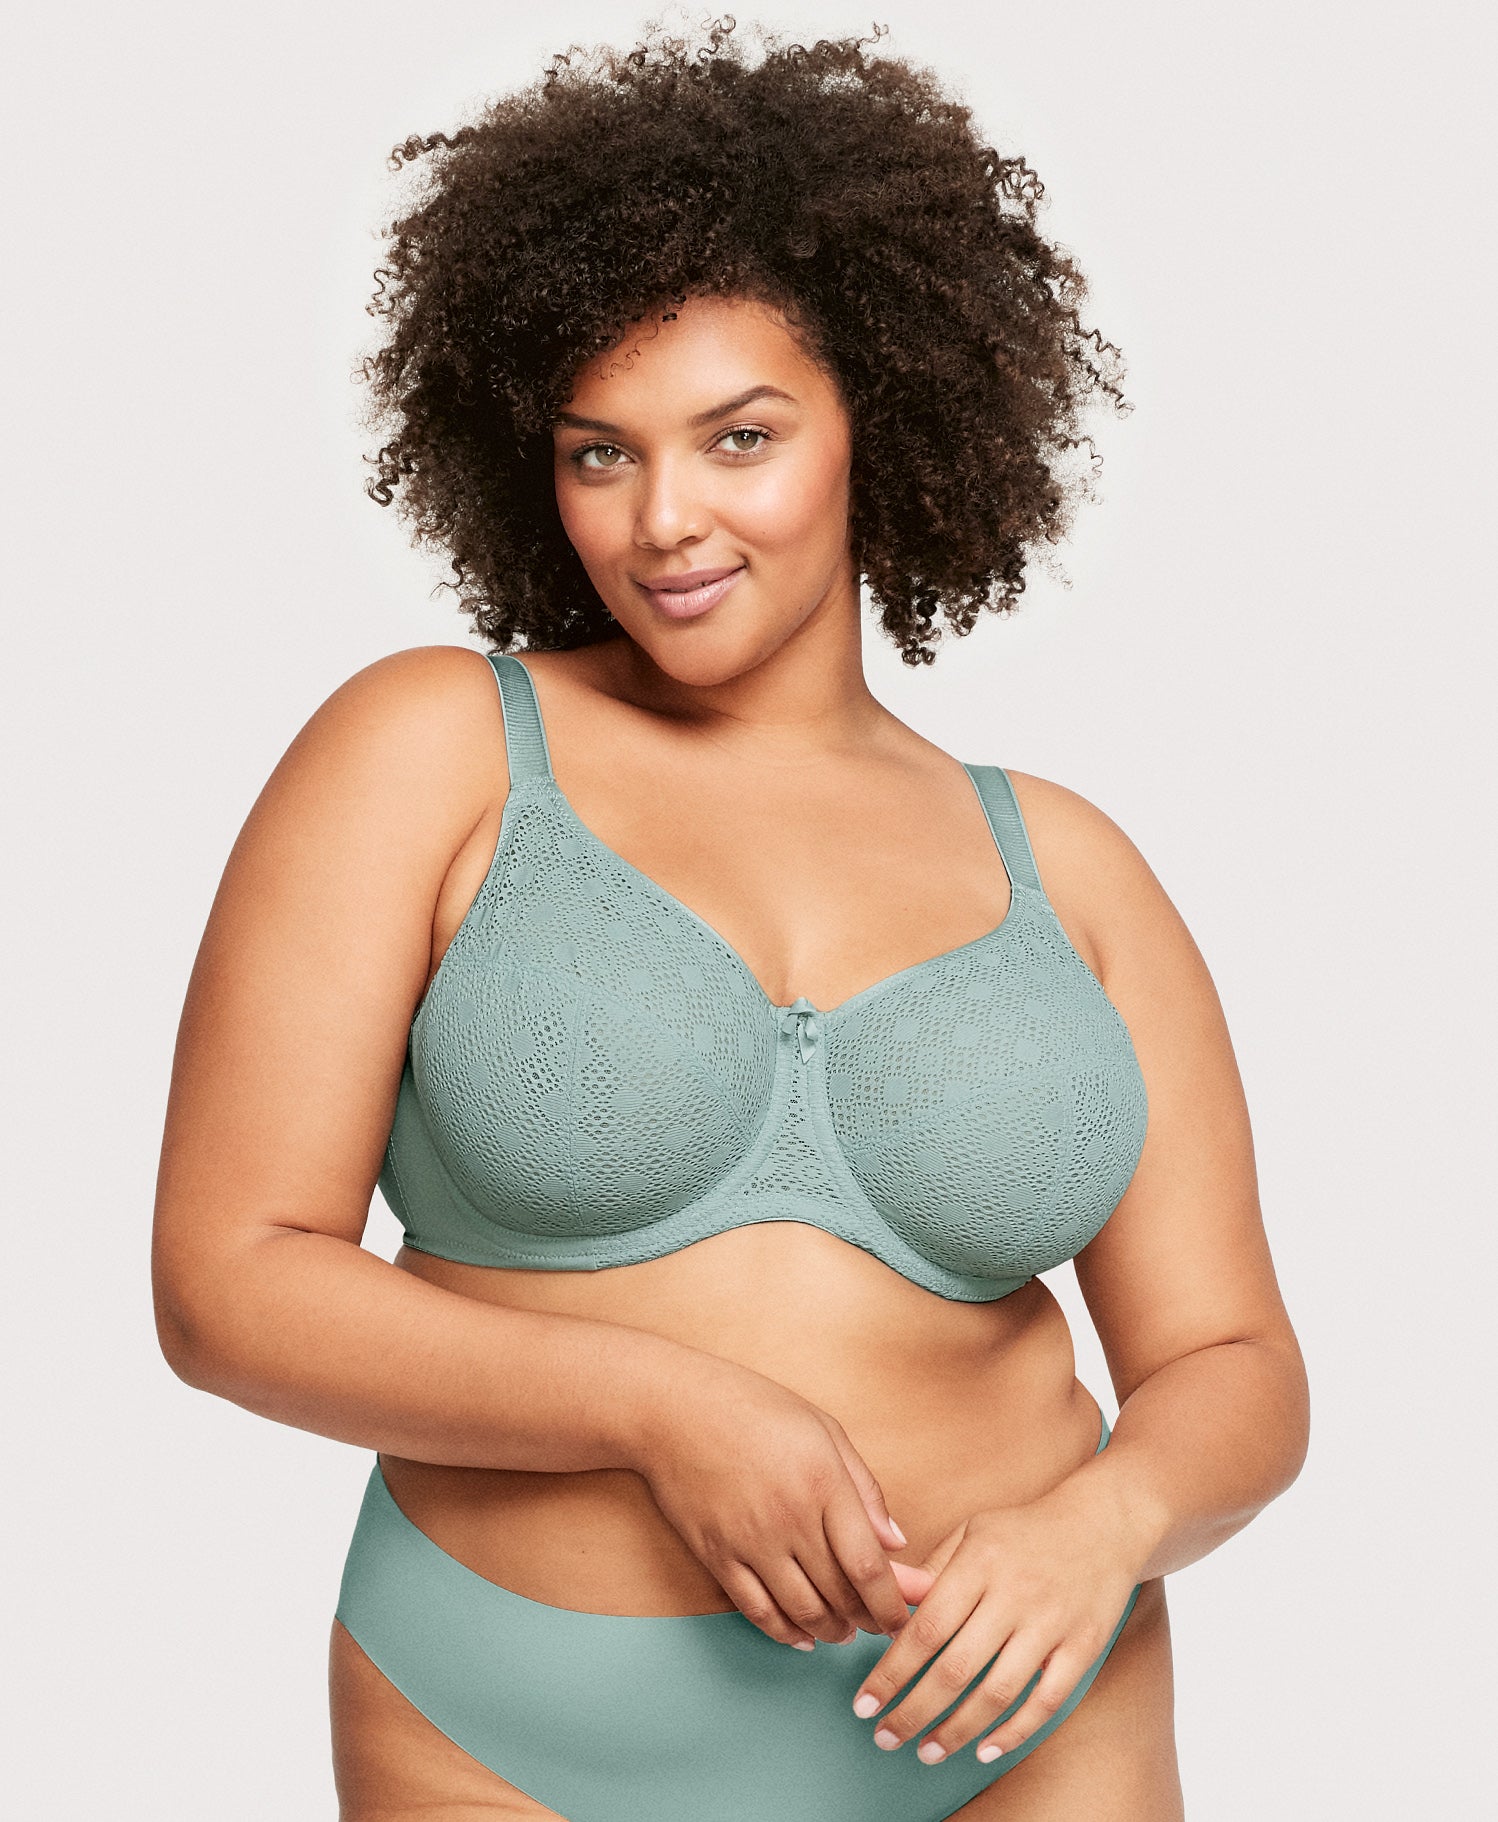 Plus Size Bras - The Largest Choice of Plus Size Bras here at Curvy Page 44  - Curvy Bras